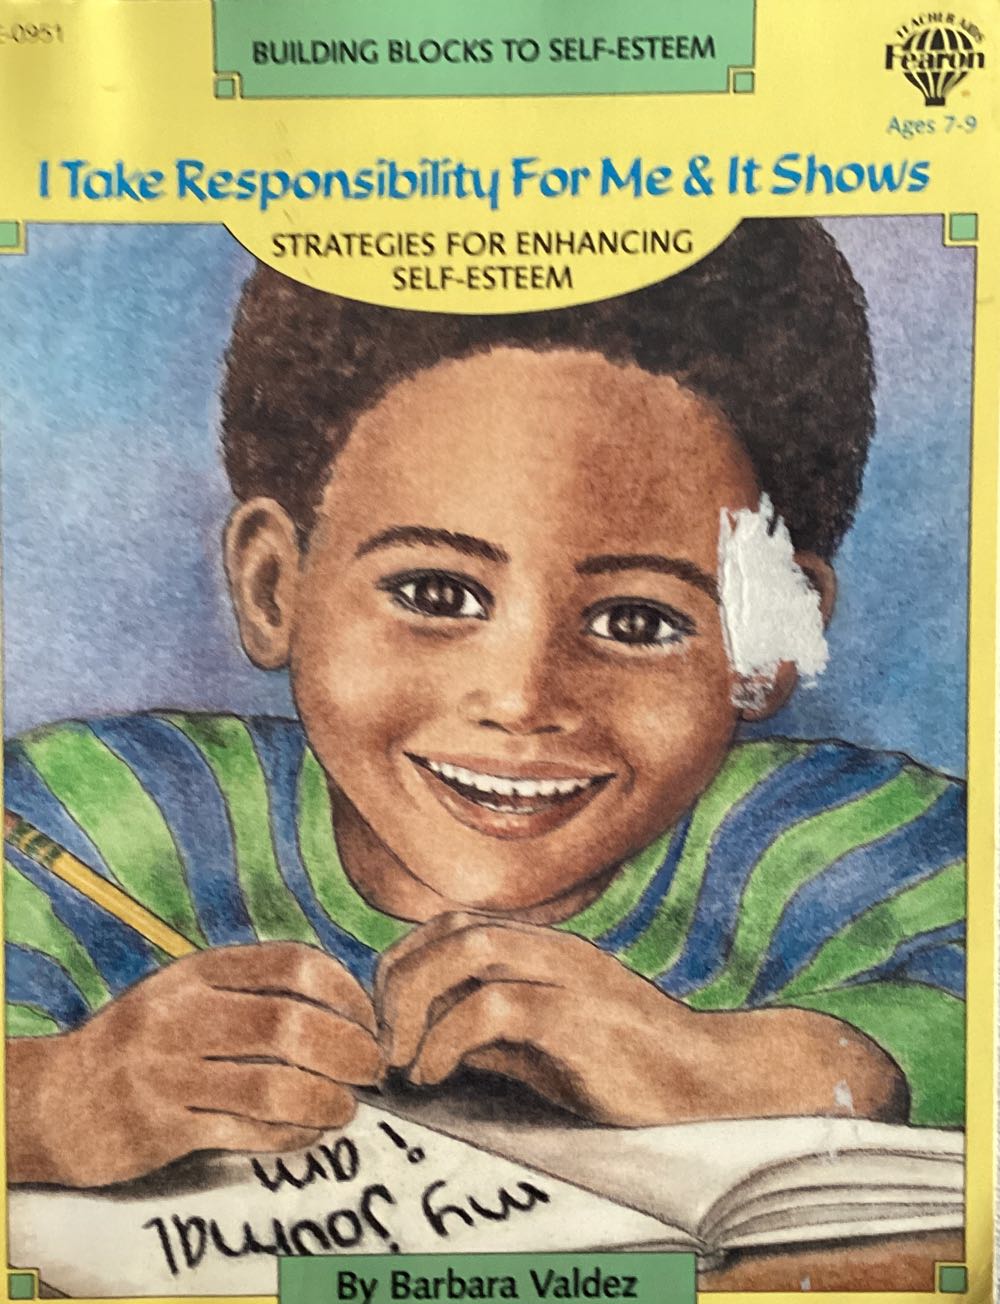 I Take Responsibility for Me and It Shows - Barbara Valdez (Fearon Teacher Aids) book collectible [Barcode 9780866539517] - Main Image 1